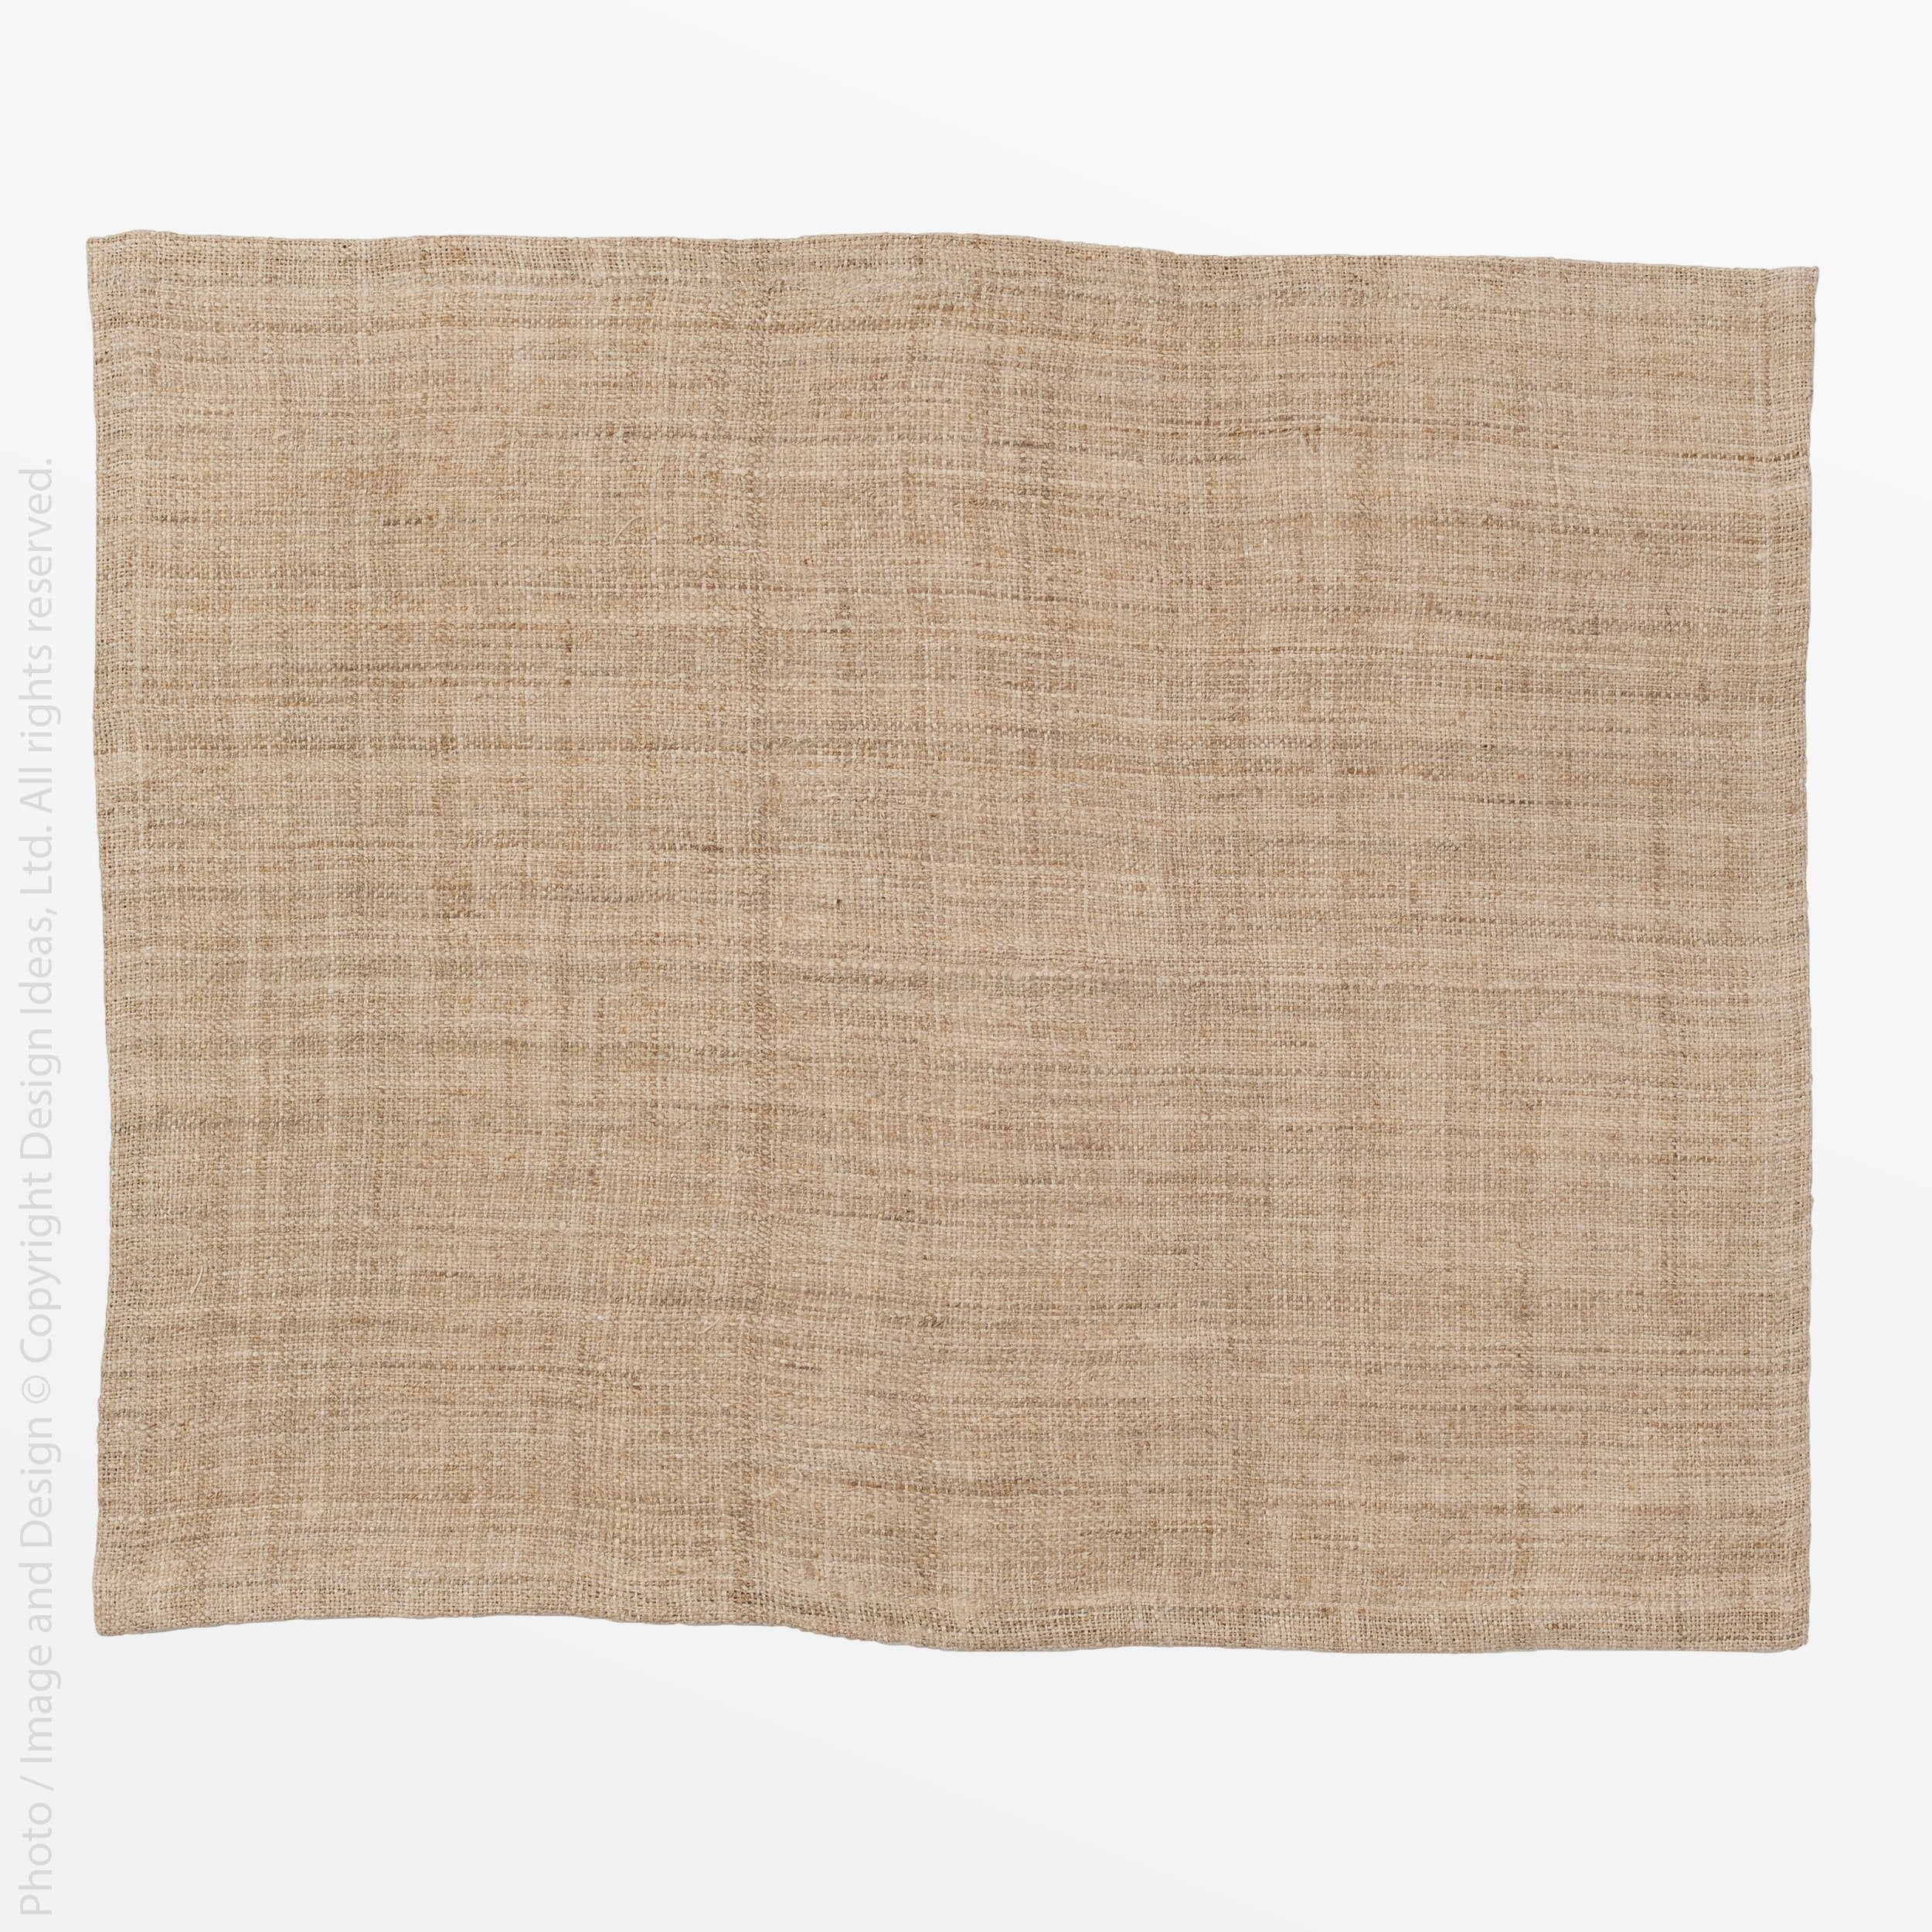 Marari Hemp Placemat Sand Color | Image 4 | From the Marari Collection | Exquisitely created with natural hemp for long lasting use | This placemat is sustainably sourced | Available in natural, gray and bleached colors | texxture home